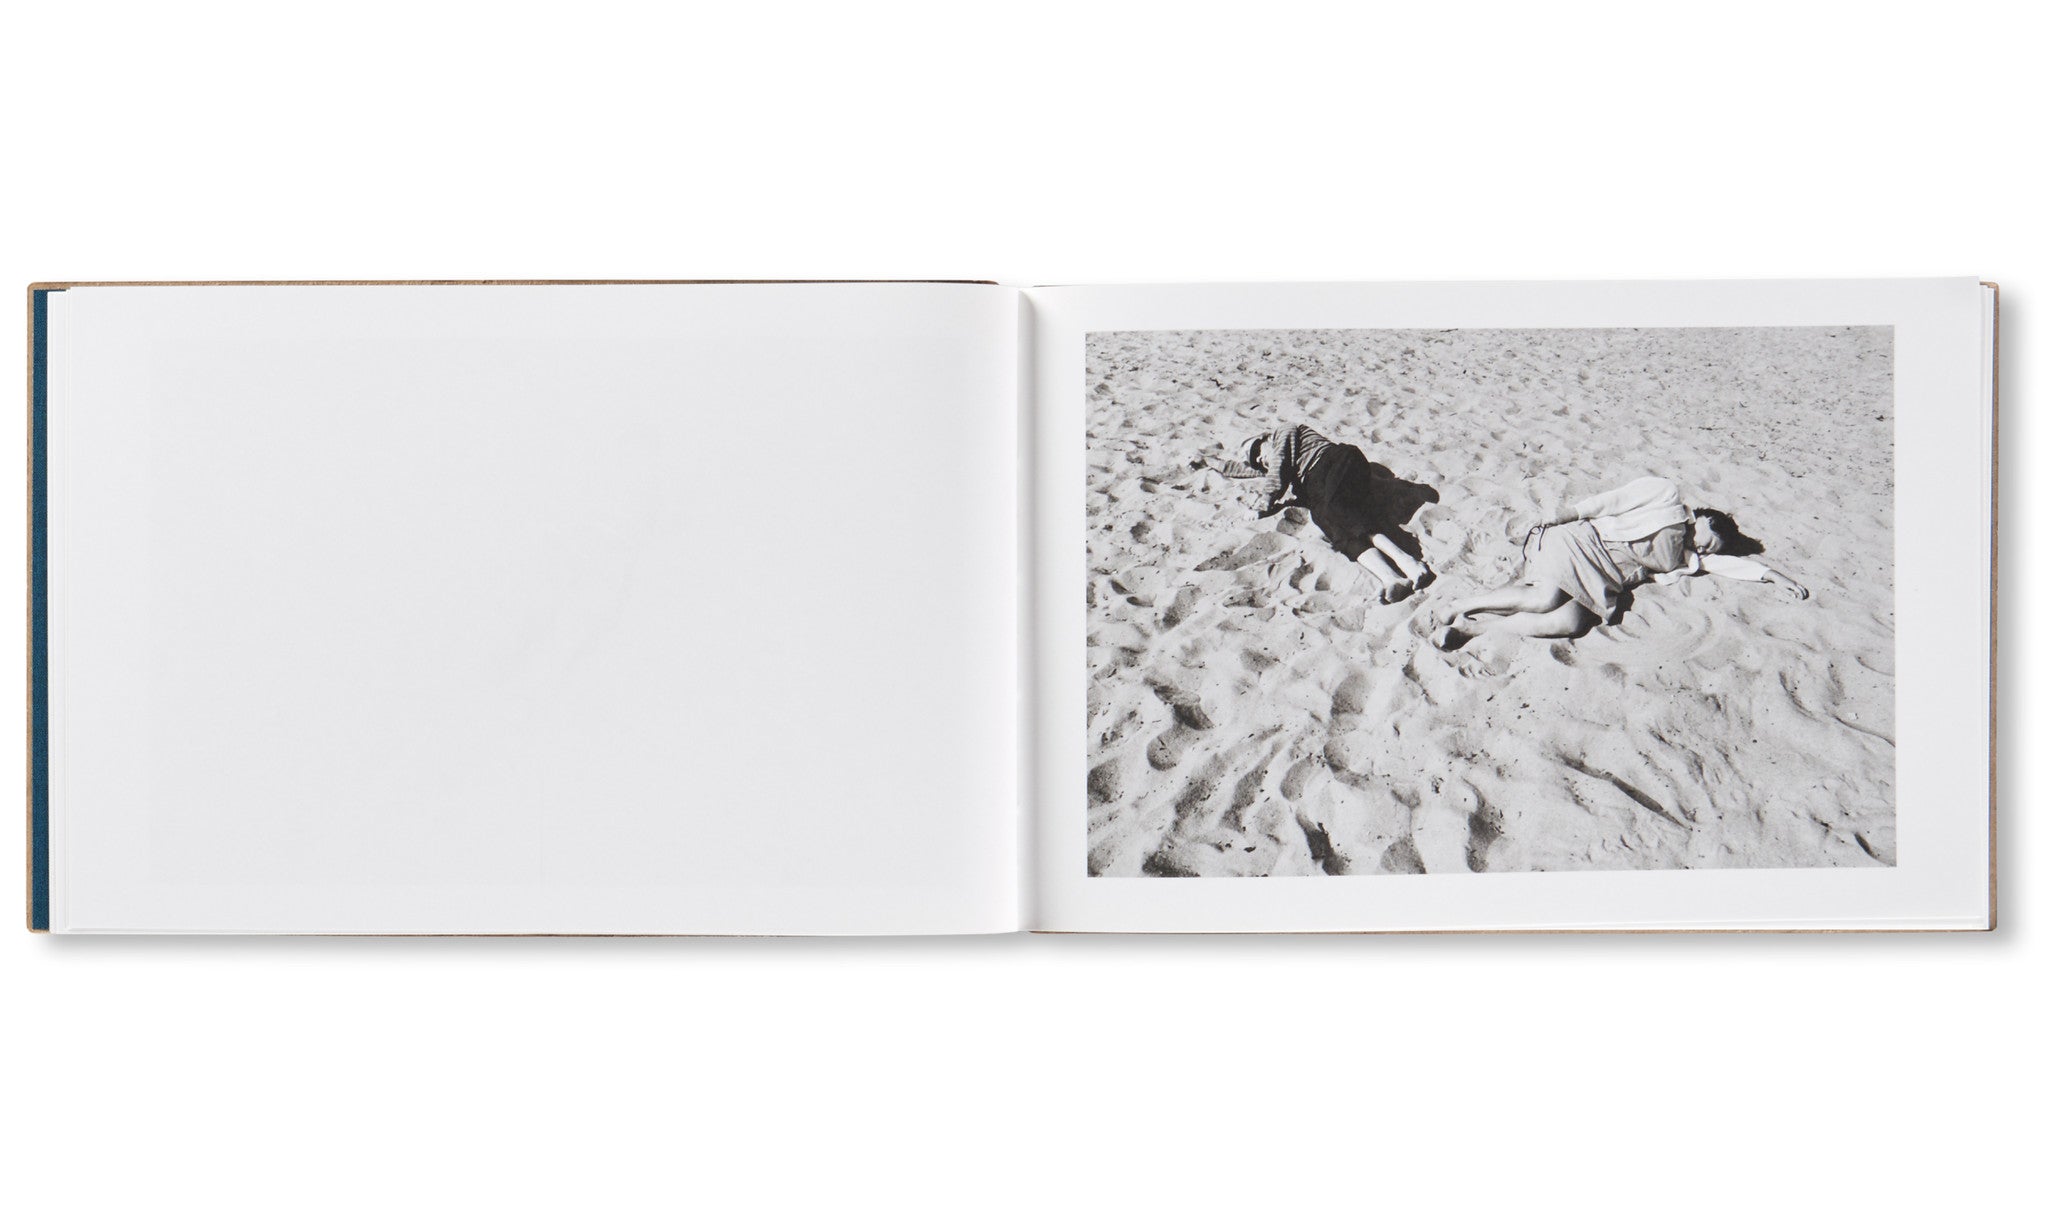 BEACH PICTURES, 1969-70 by Anthony Hernandez [SIGNED]